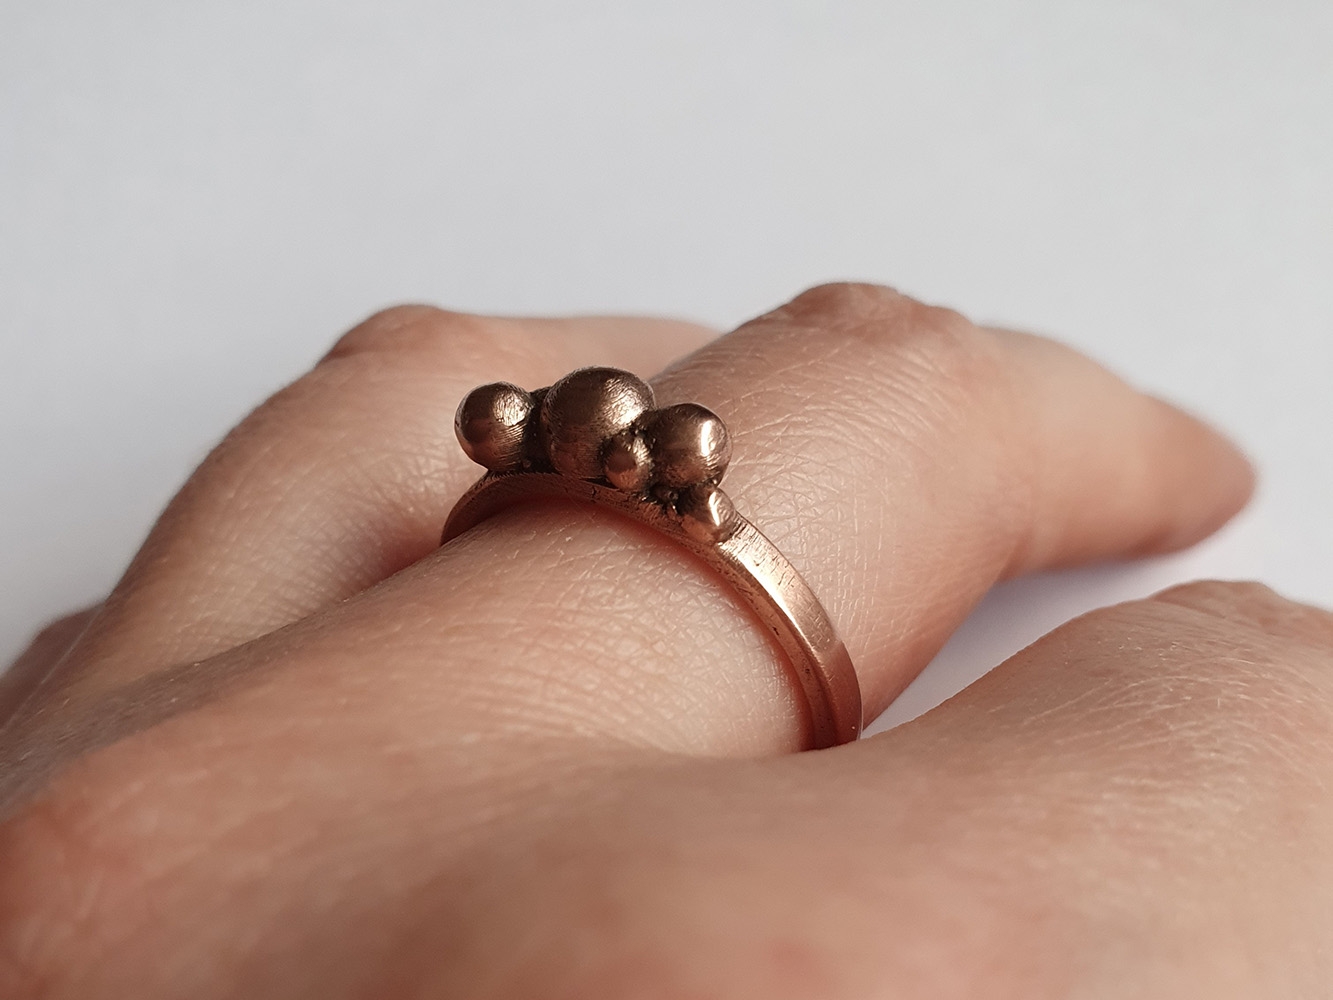 Copper ring with band and multiple spheres on top worn on a hand